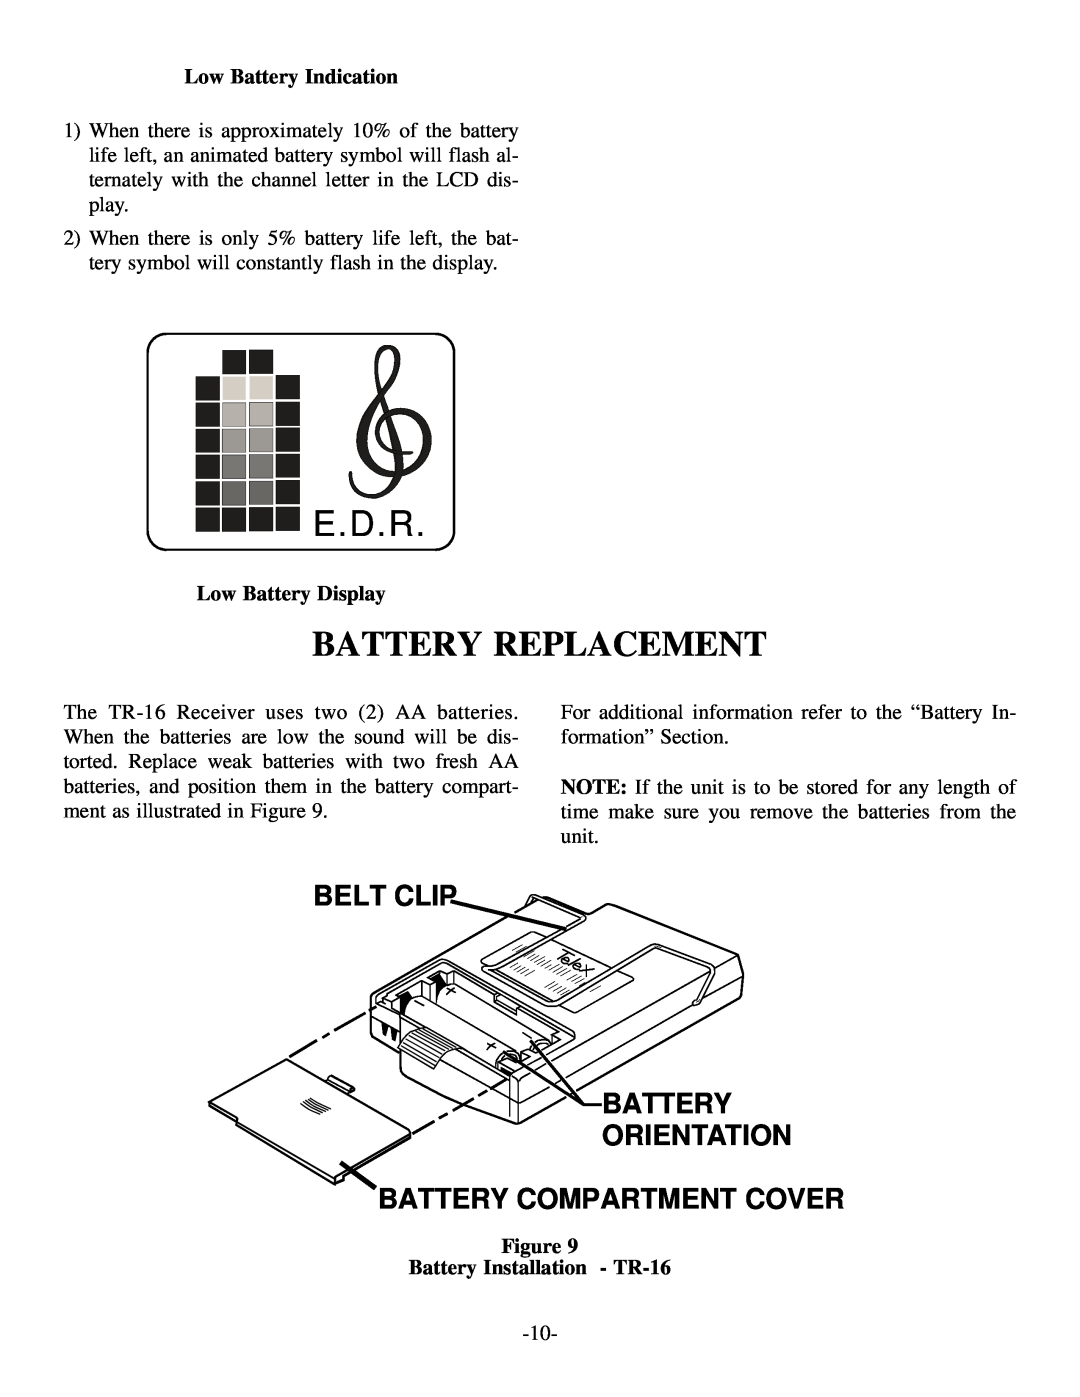 Telex E.D.R, Battery Replacement, Low Battery Indication, Low Battery Display, Figure Battery Installation - TR-16 